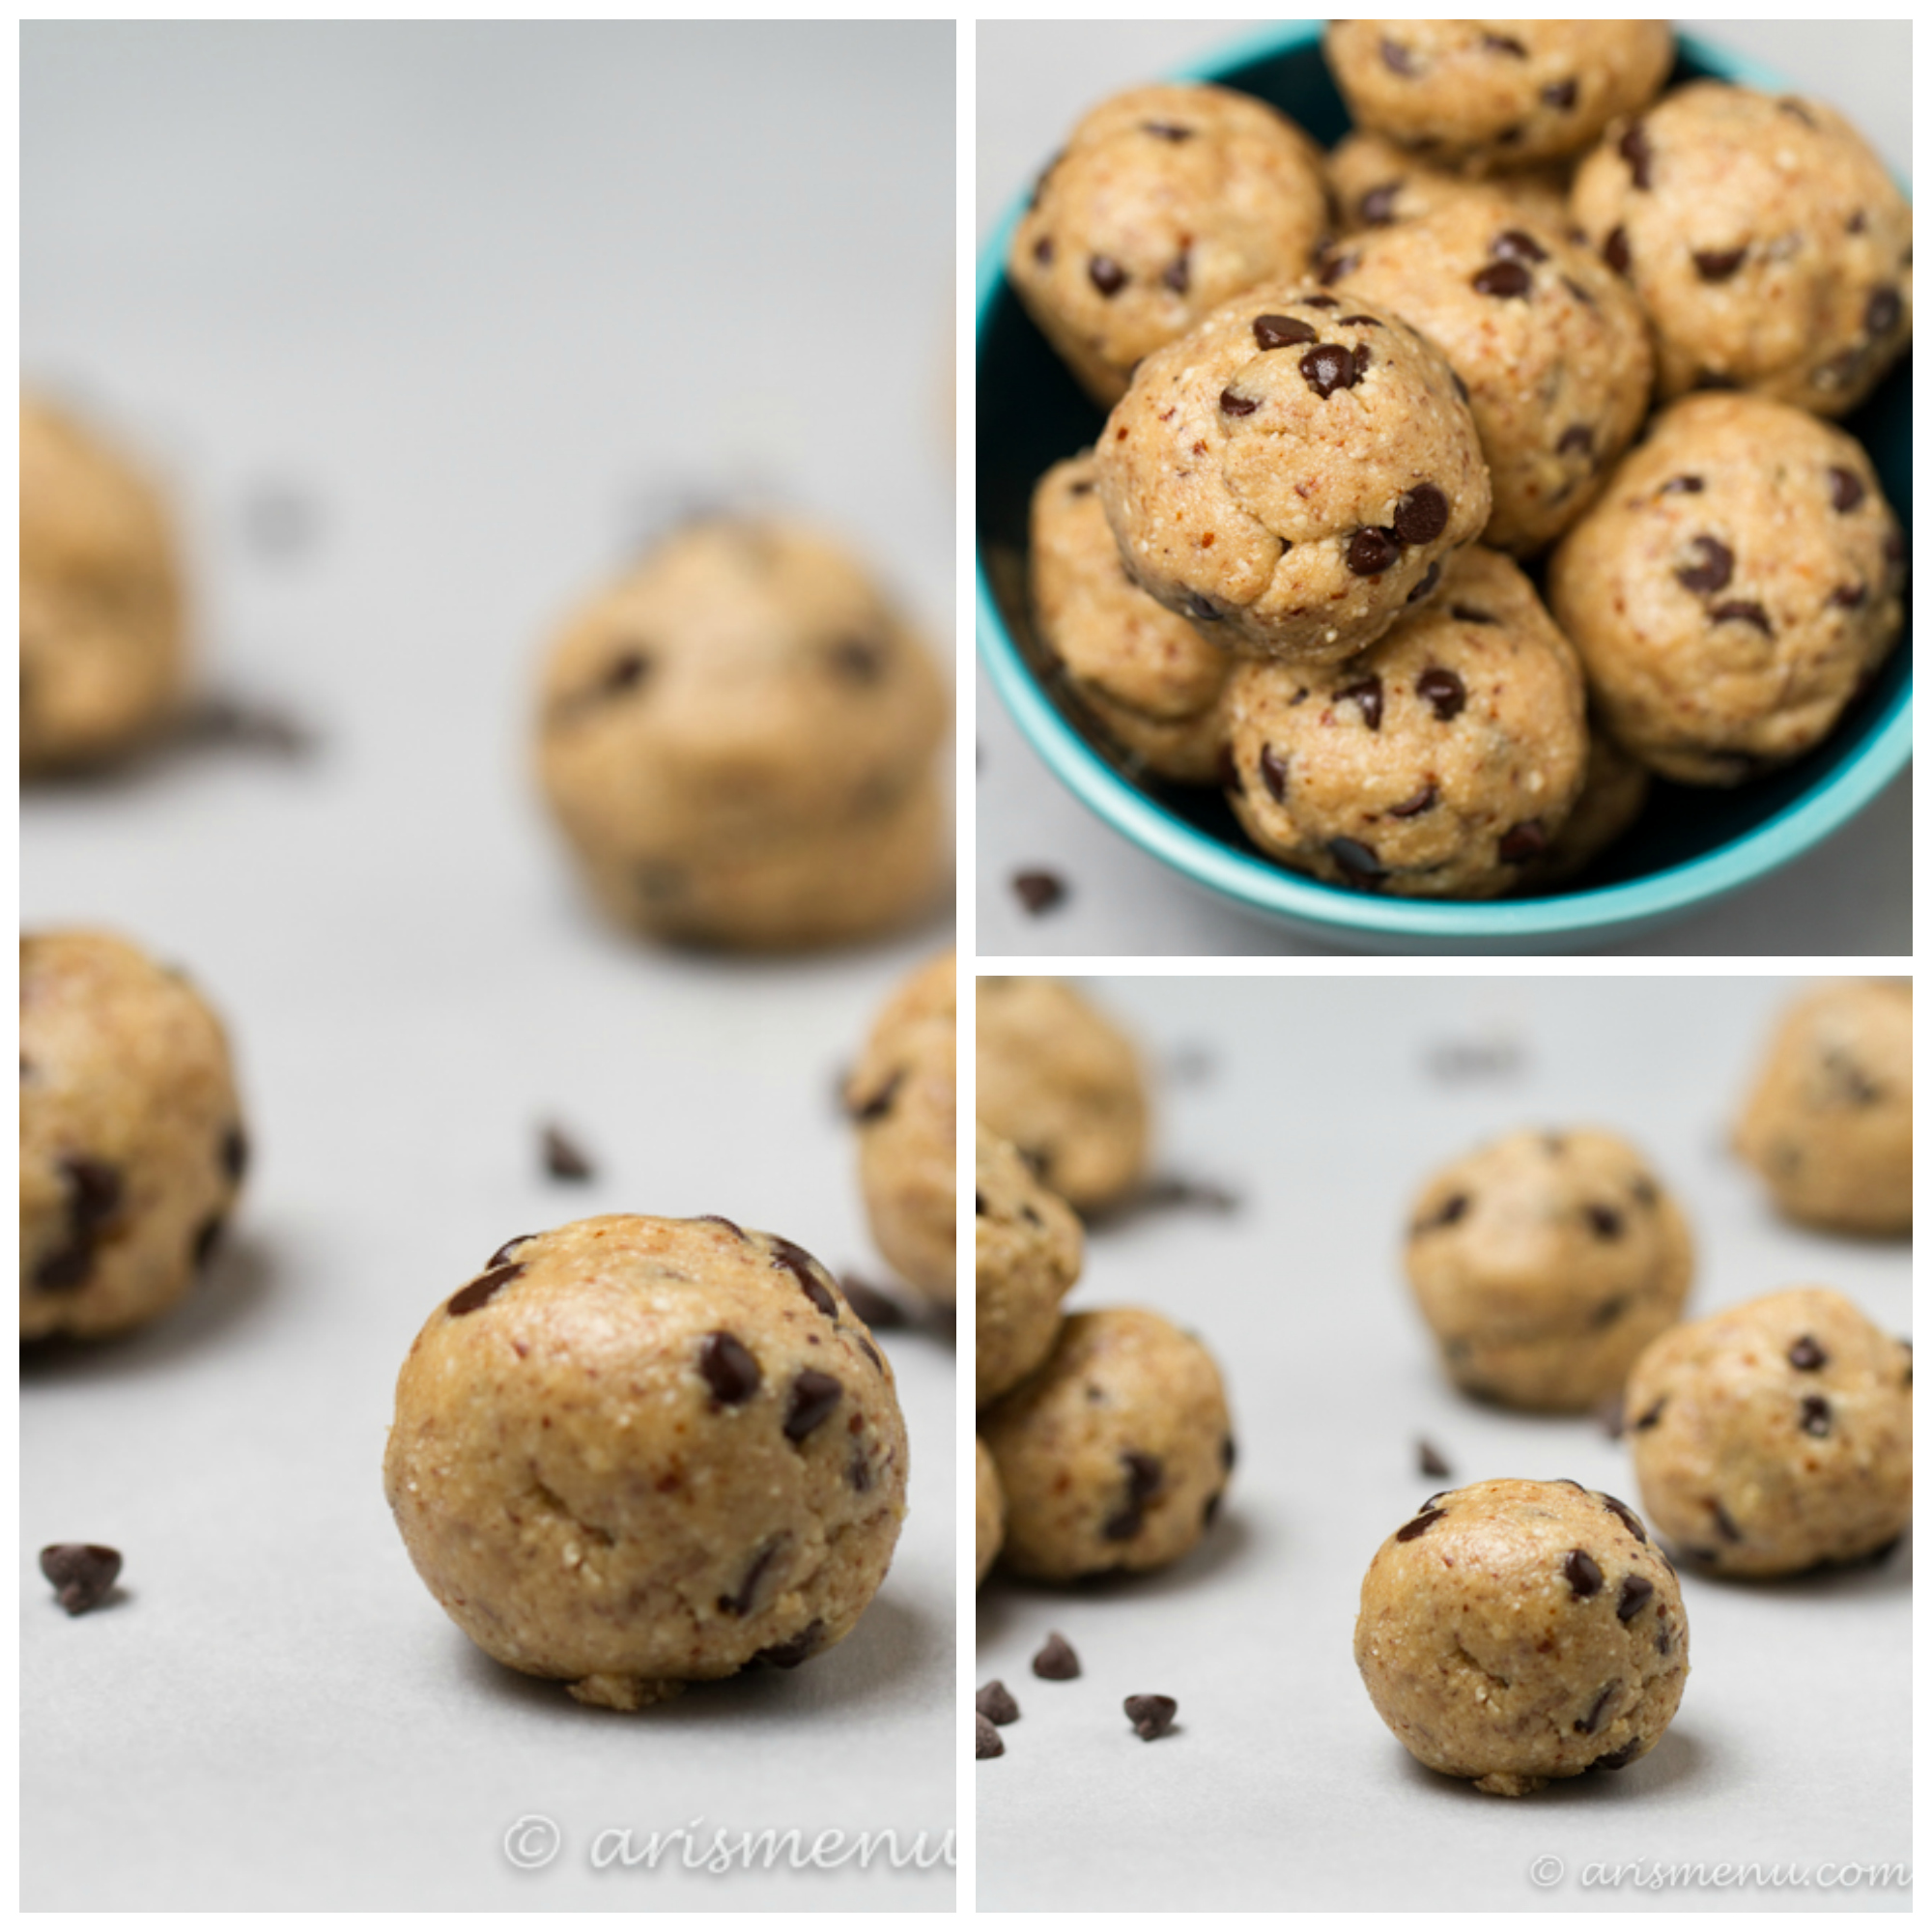 Peanut Butter Chocolate Chip Cookie Dough Bites: A healthy treat made from simple, no-bake, wholesome ingredients